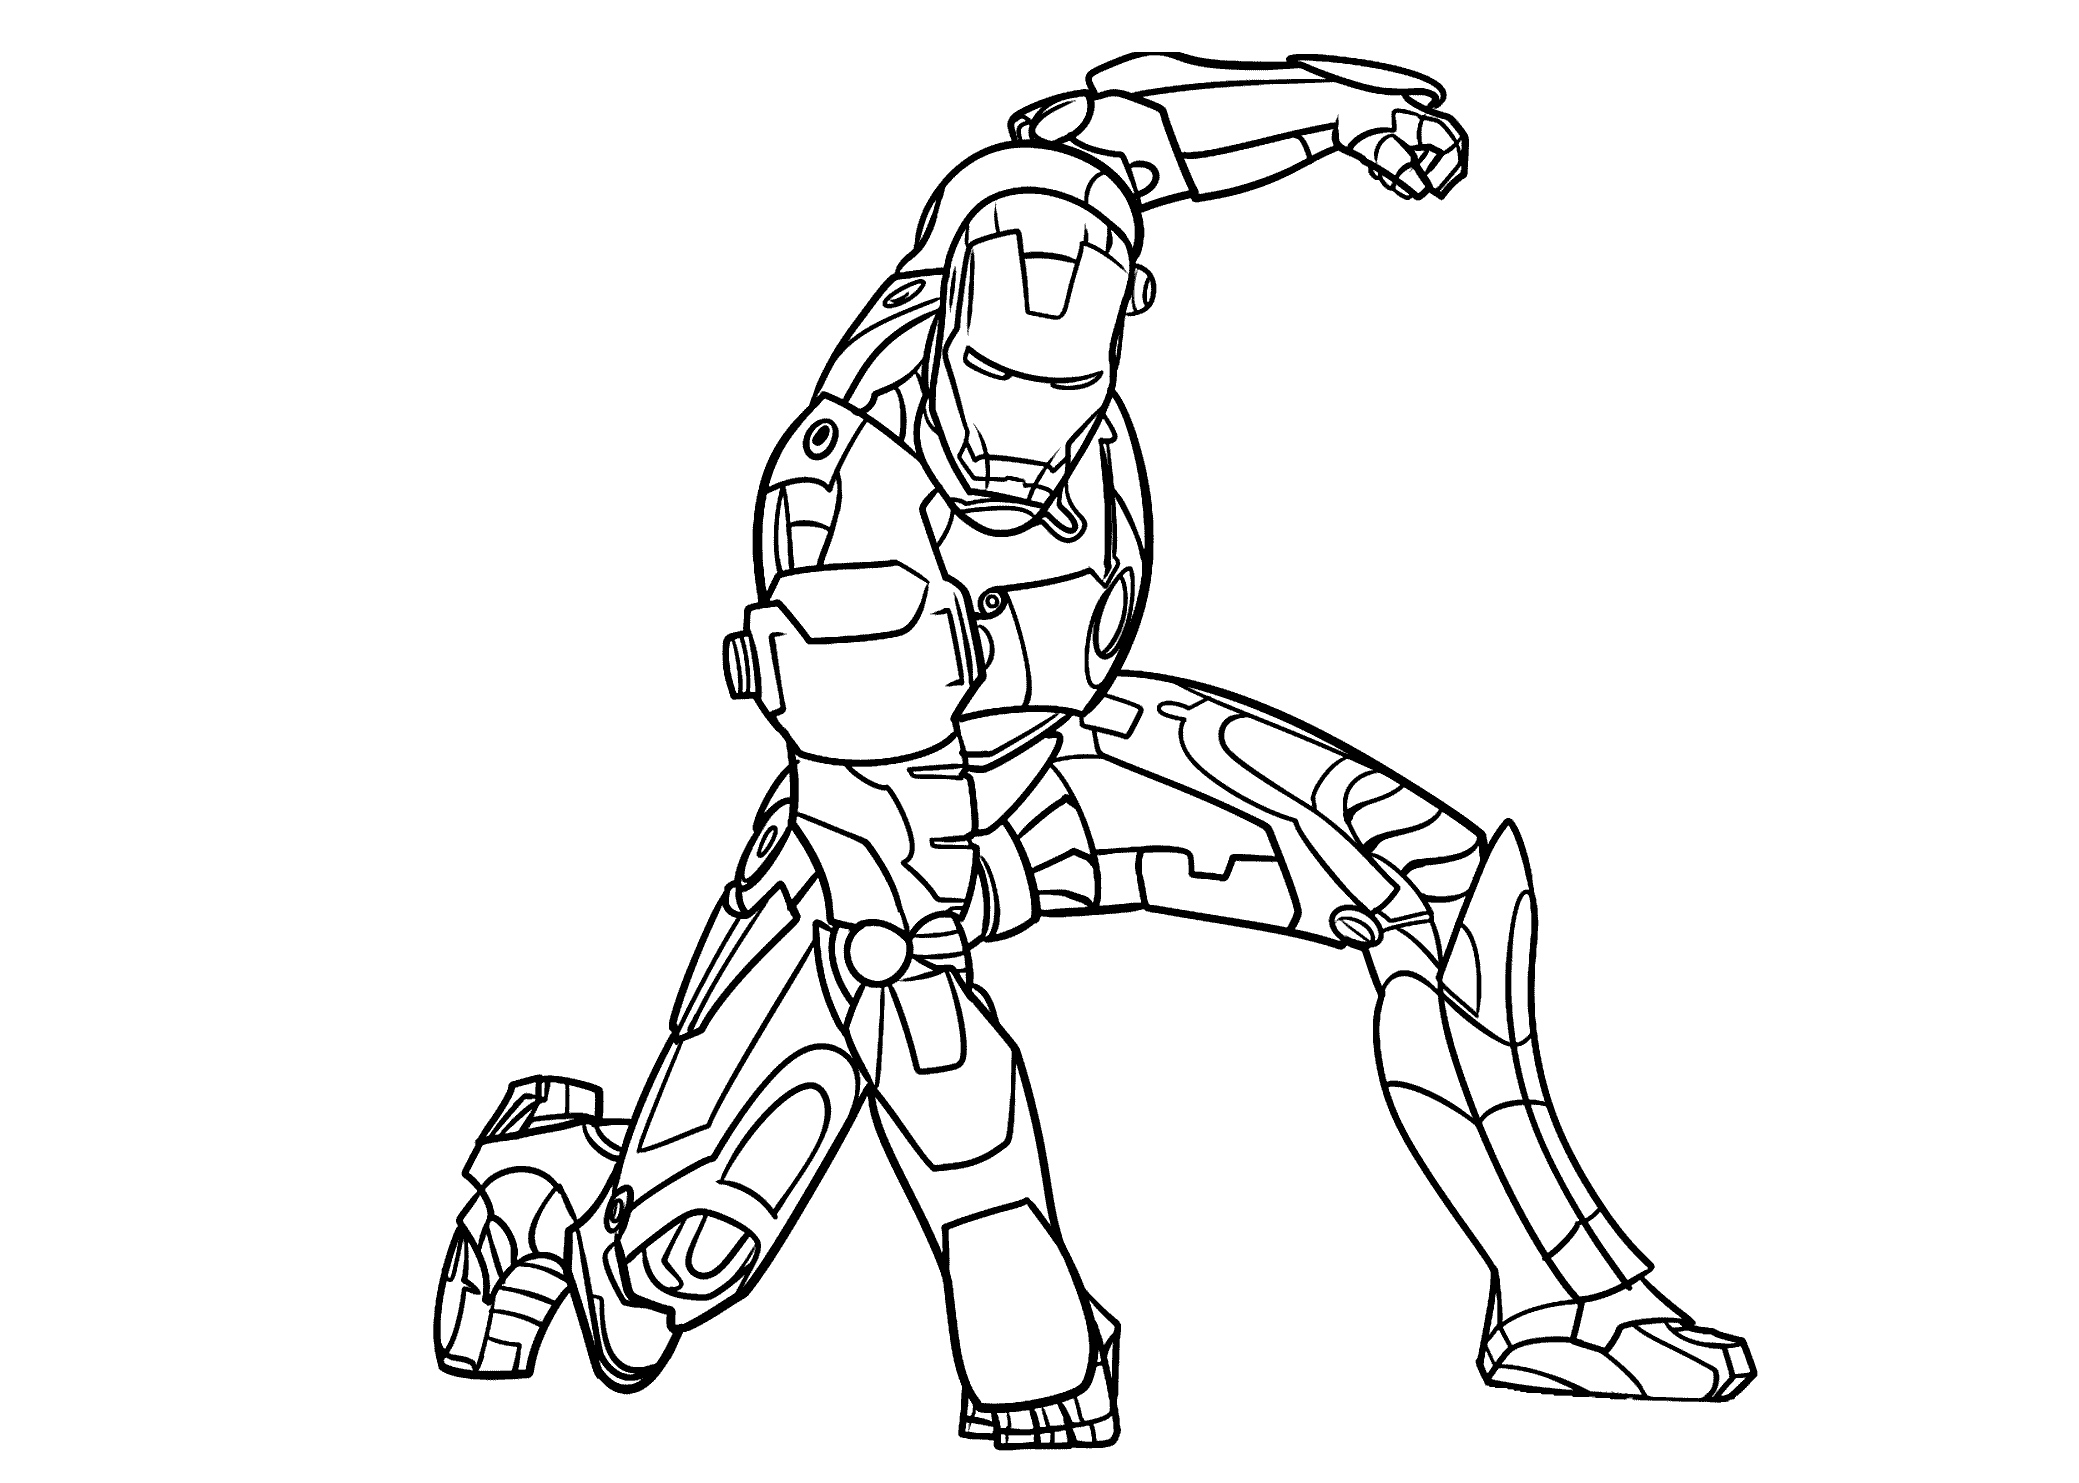 Ironman Coloring Page (20 Pictures) - Colorine.net | 2735